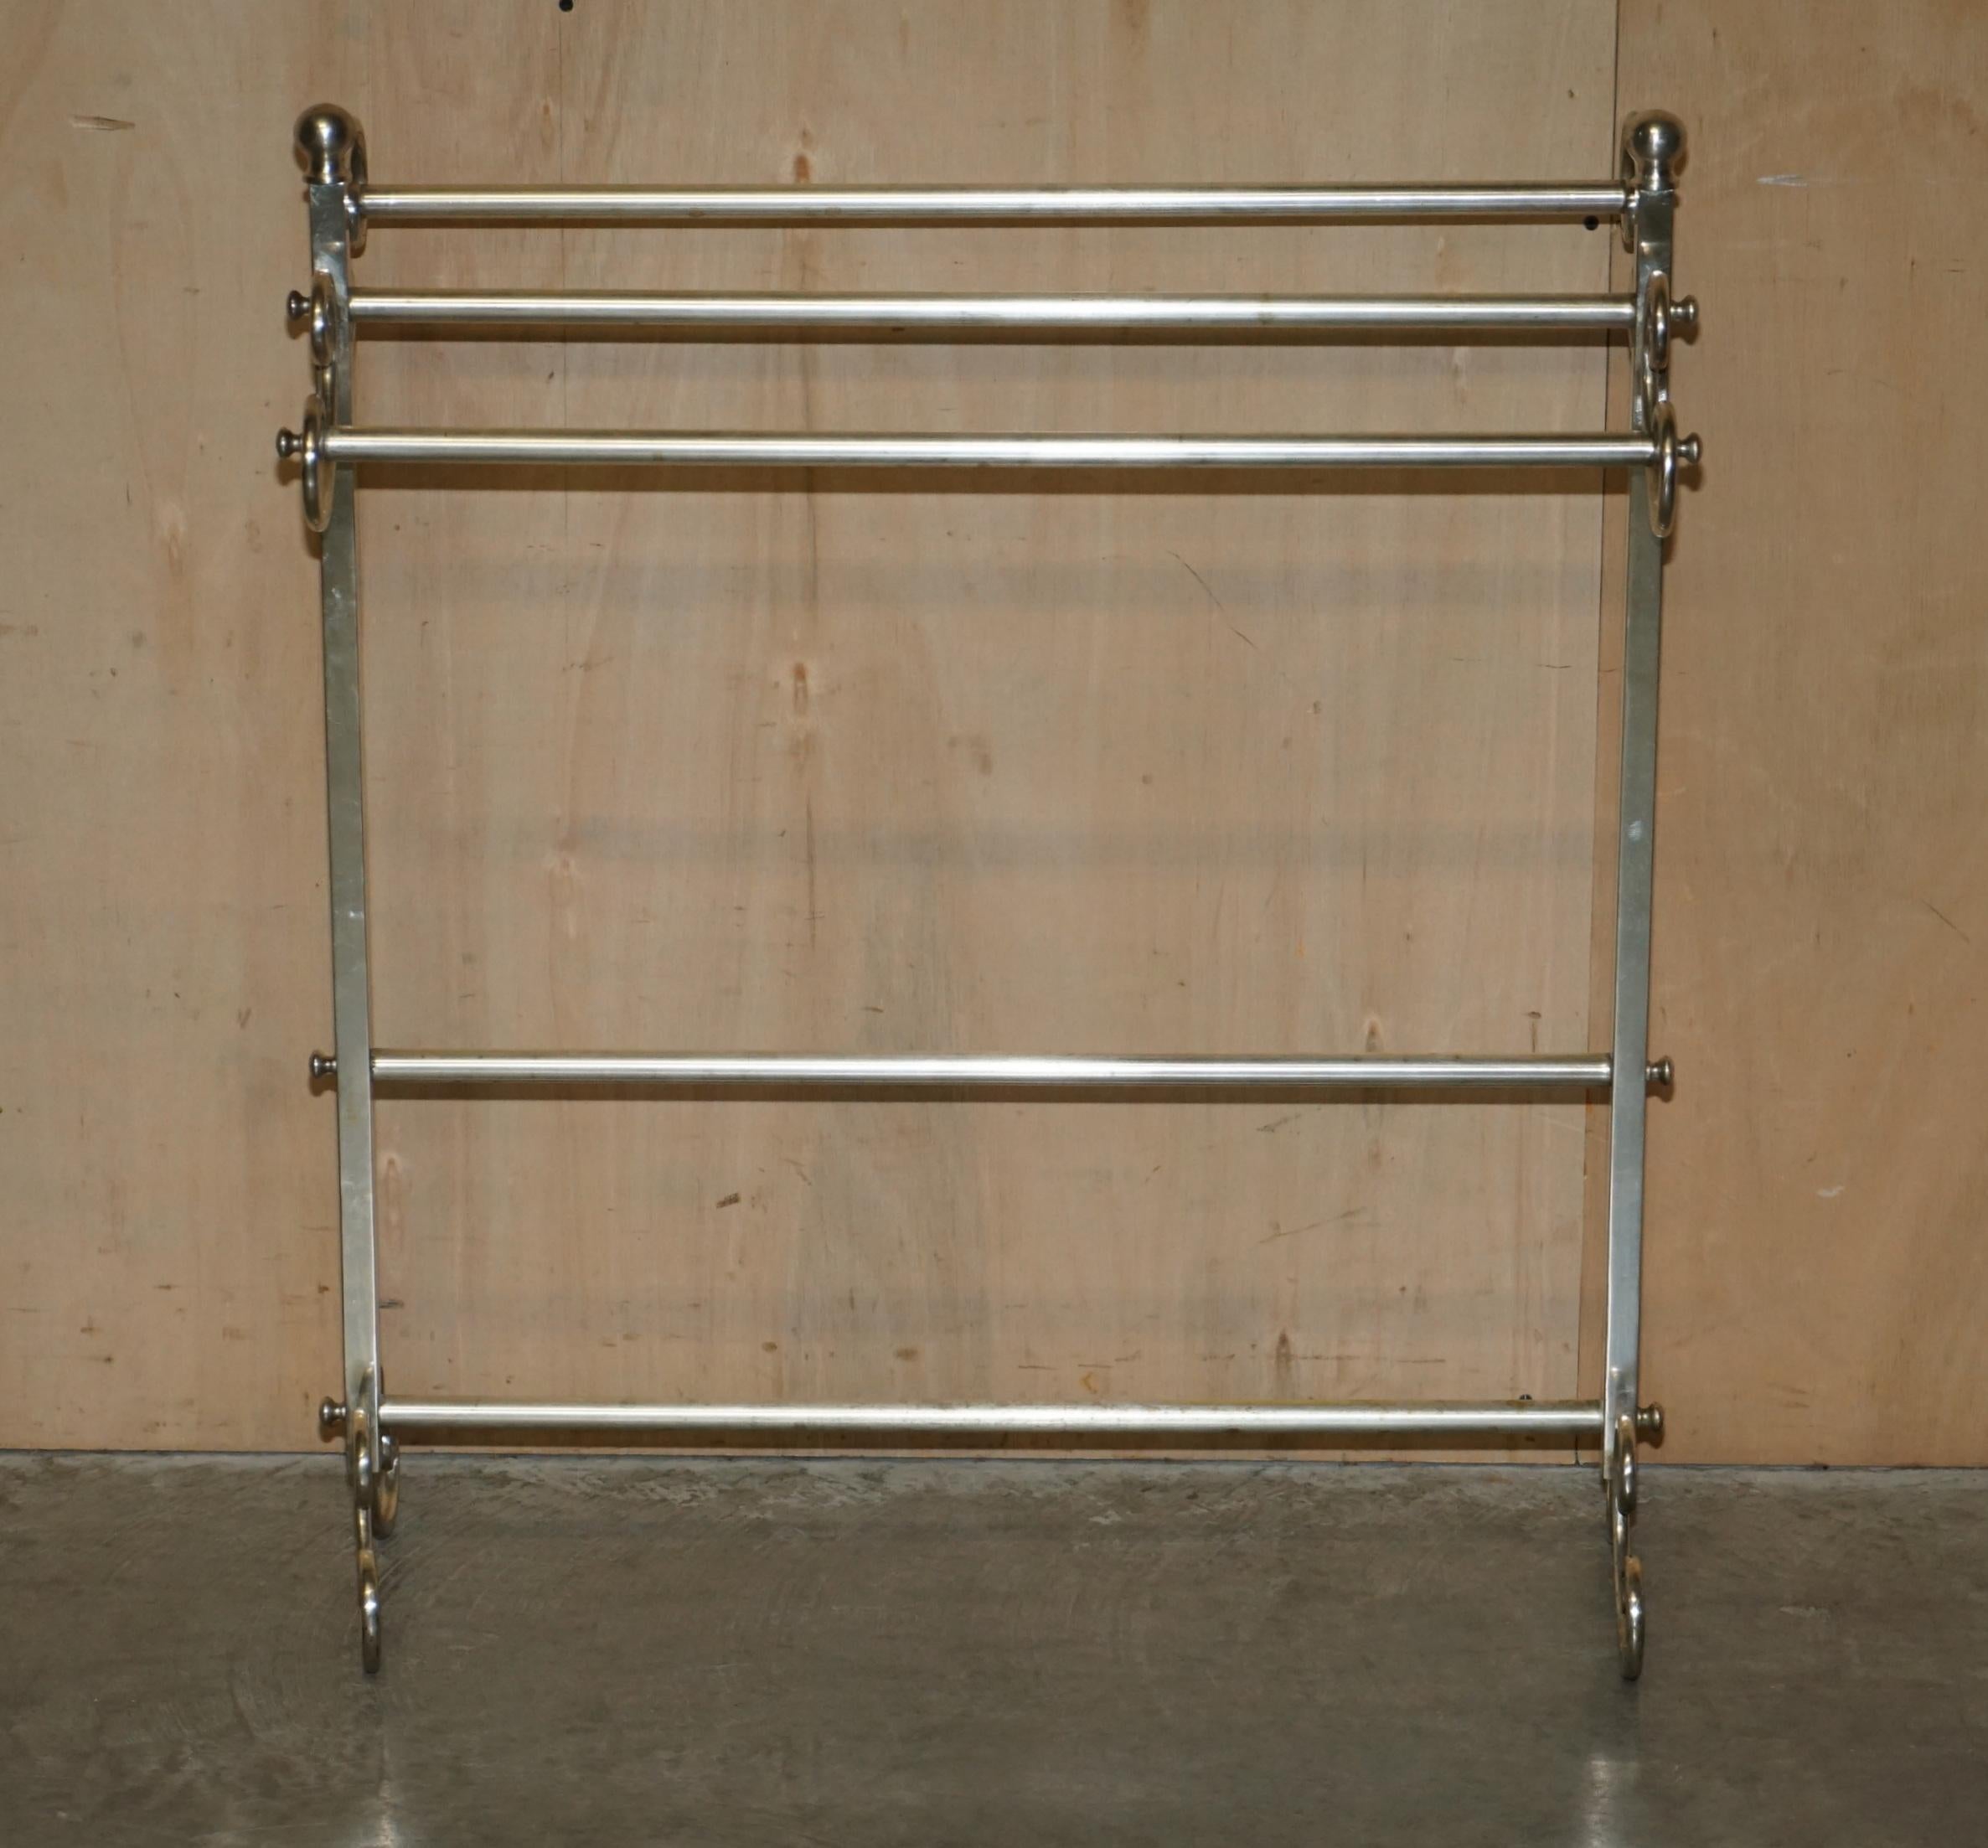 This is delighted to offer for sale this stunning vintage circa 1960s solid chrome bathroom towel rail with nicely antiqued finish

A good looking well made and decorative towel rail, this is fully chromed and very sculptural, it is circa 1960s